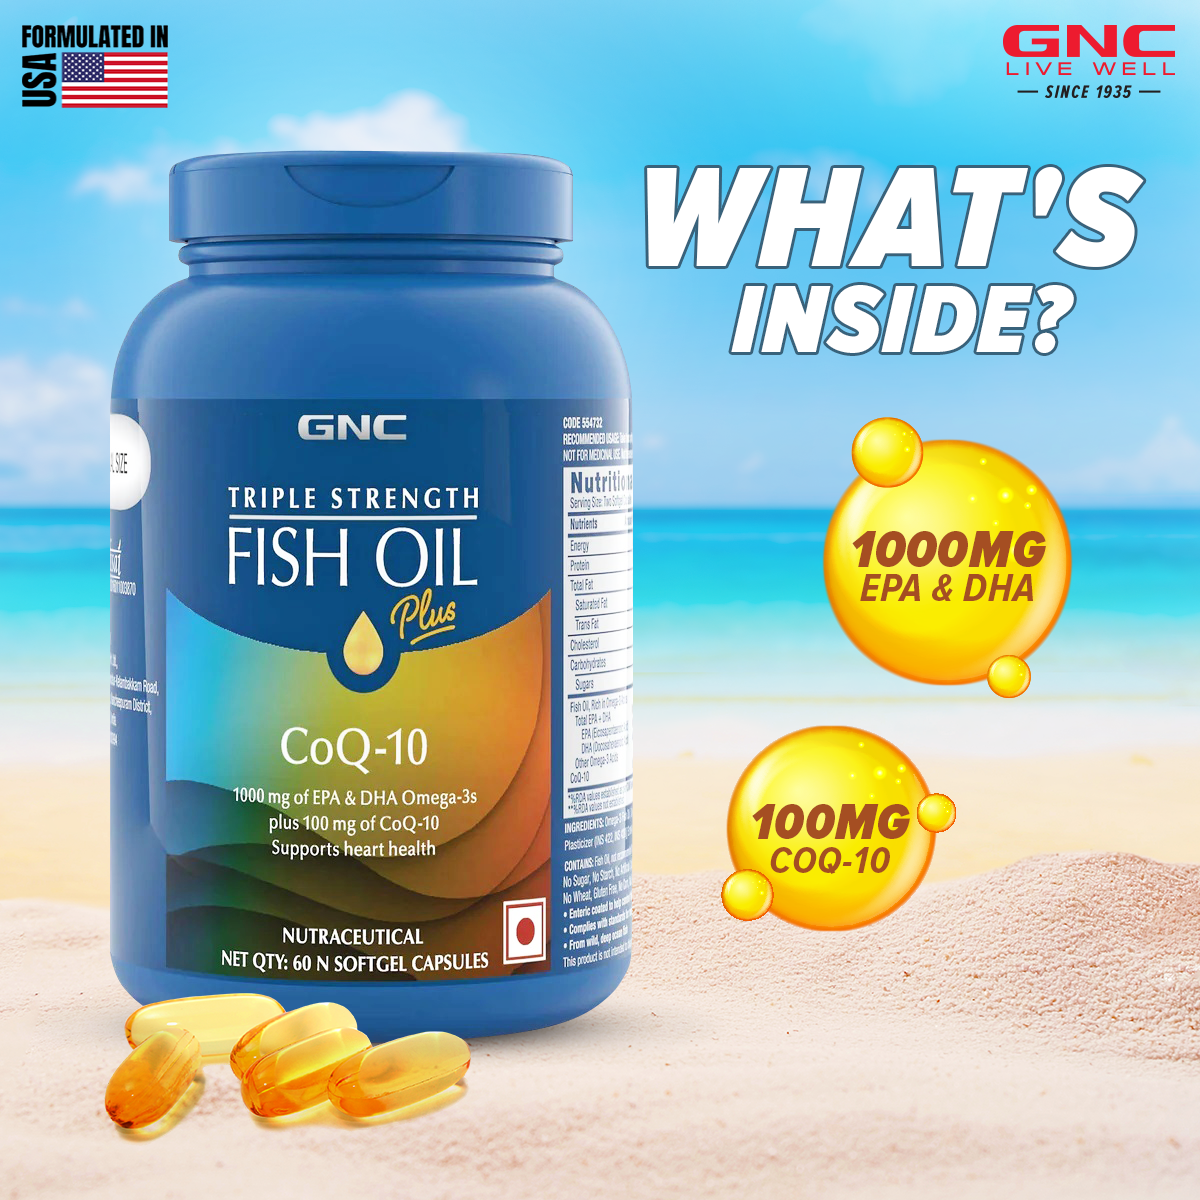 GNC Triple Strength Fish Oil Plus CoQ - 1000mg - For Heart Health, Memory & Overall Well-Being